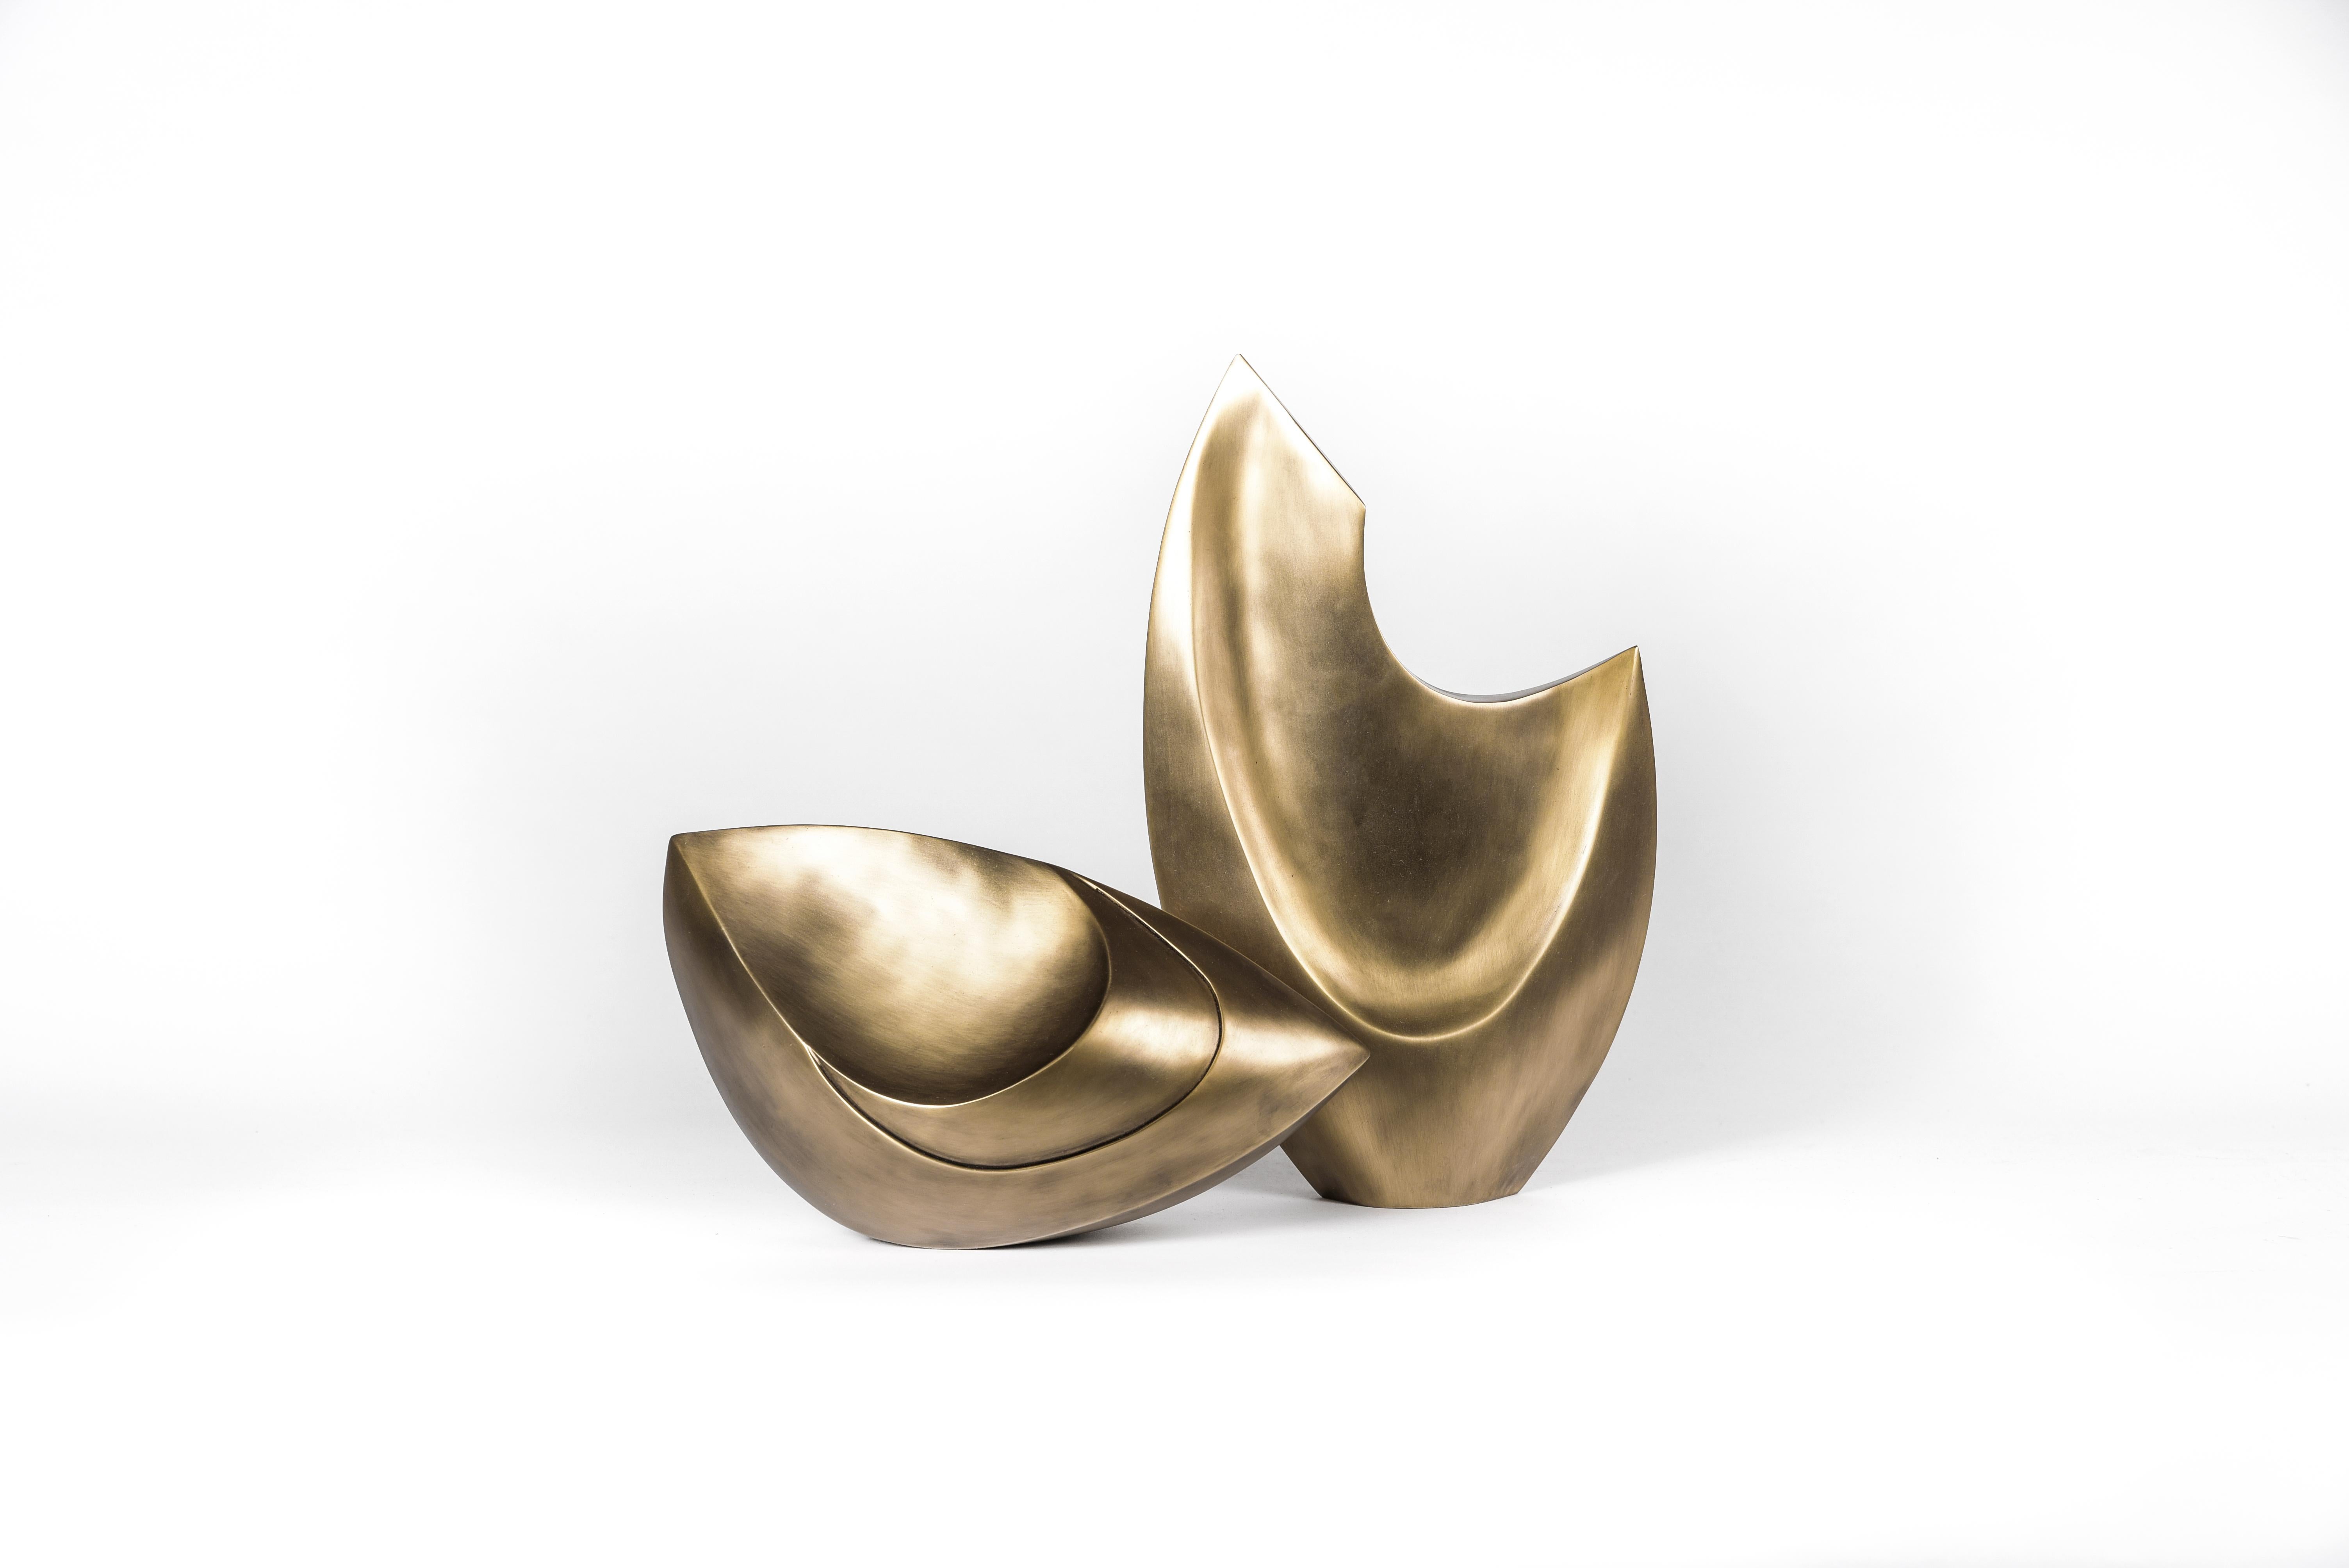 Hand-Crafted Abstract Sculpture in Bronze-Patina Brass by Patrick Coard, Paris